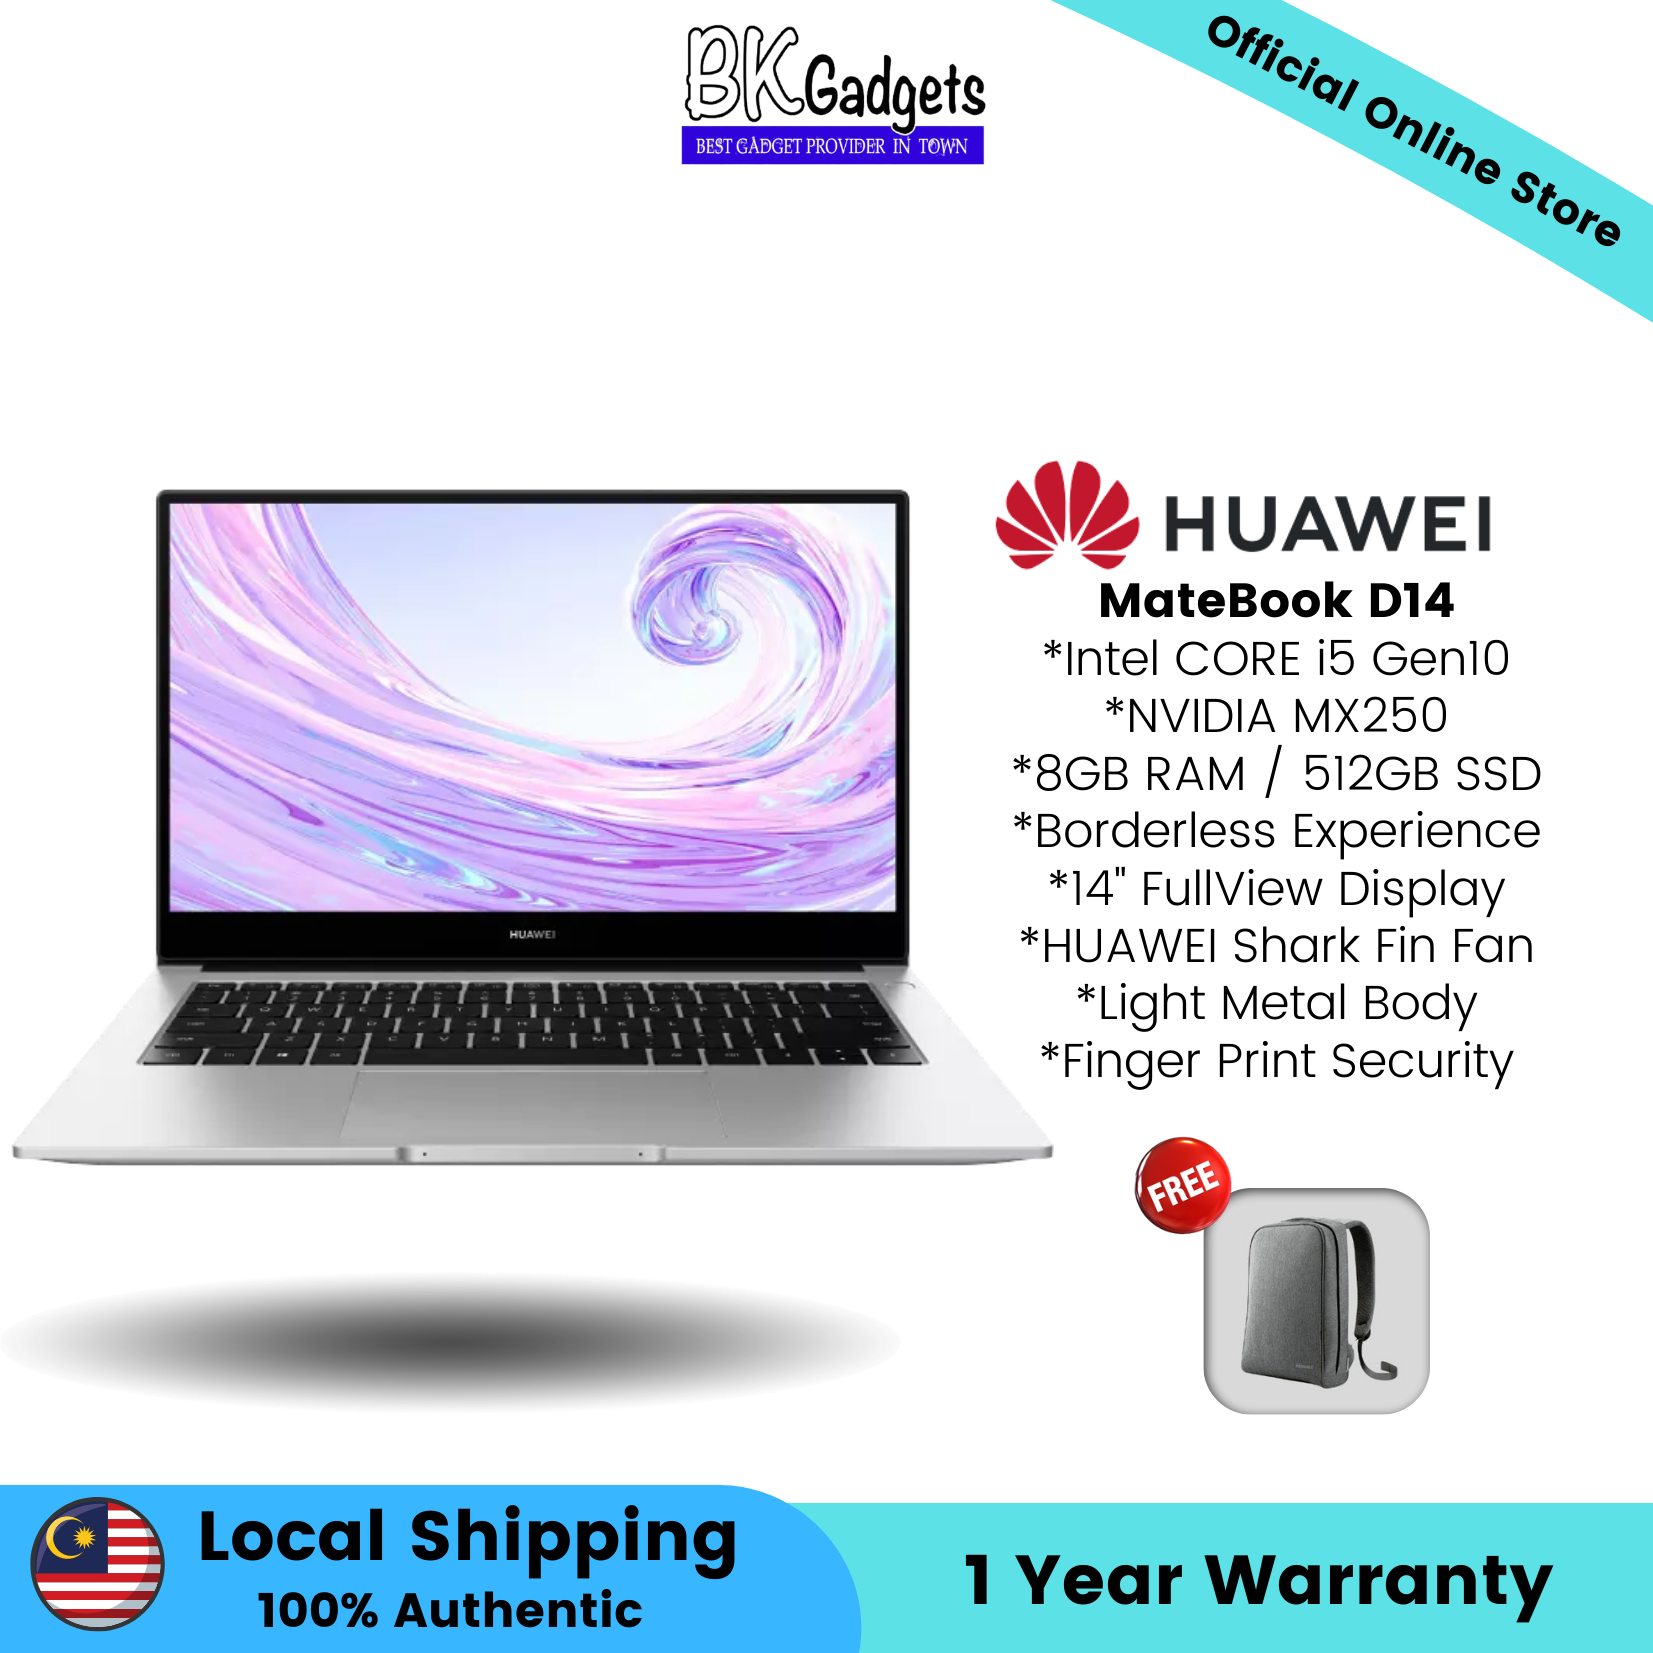 Huawei Matebook D14 - 8GB RAM / 512GB SSD | NVIDIA MX250 | 14\'+String.fromCharCode(34)+\' FullView Display